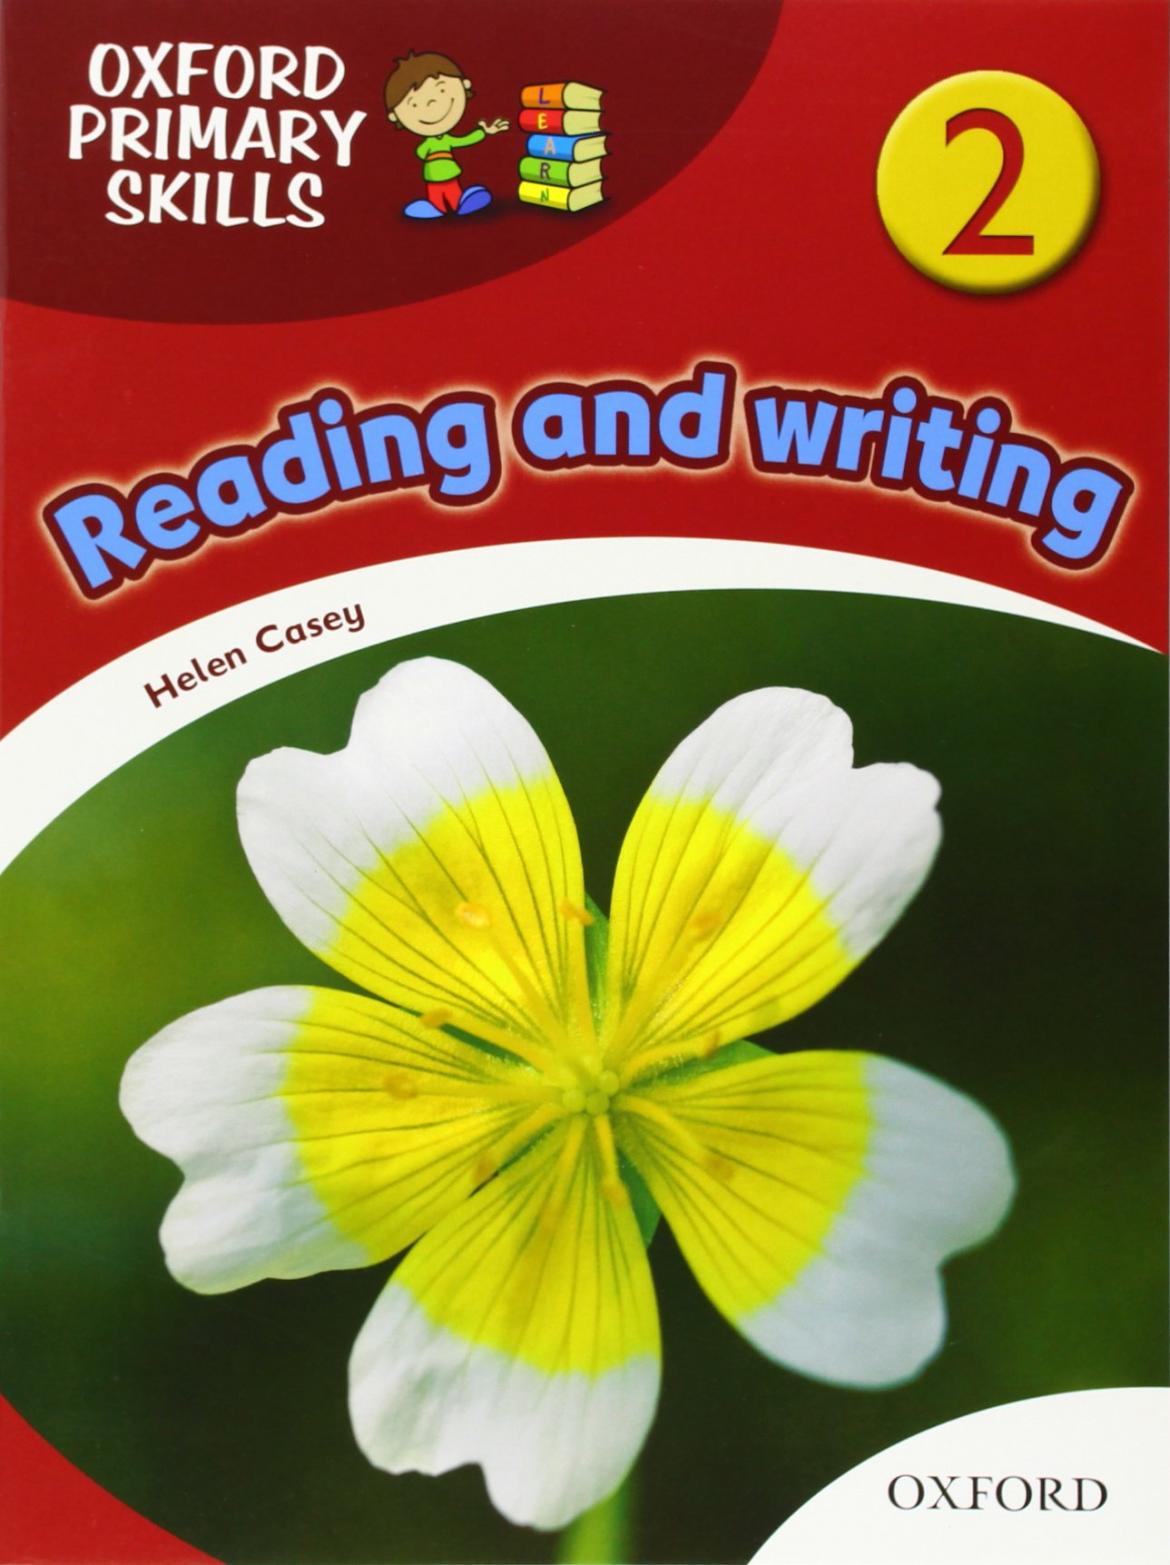 OXFORD PRIMARY SKILLS 2 Reading and Writing Skills Book